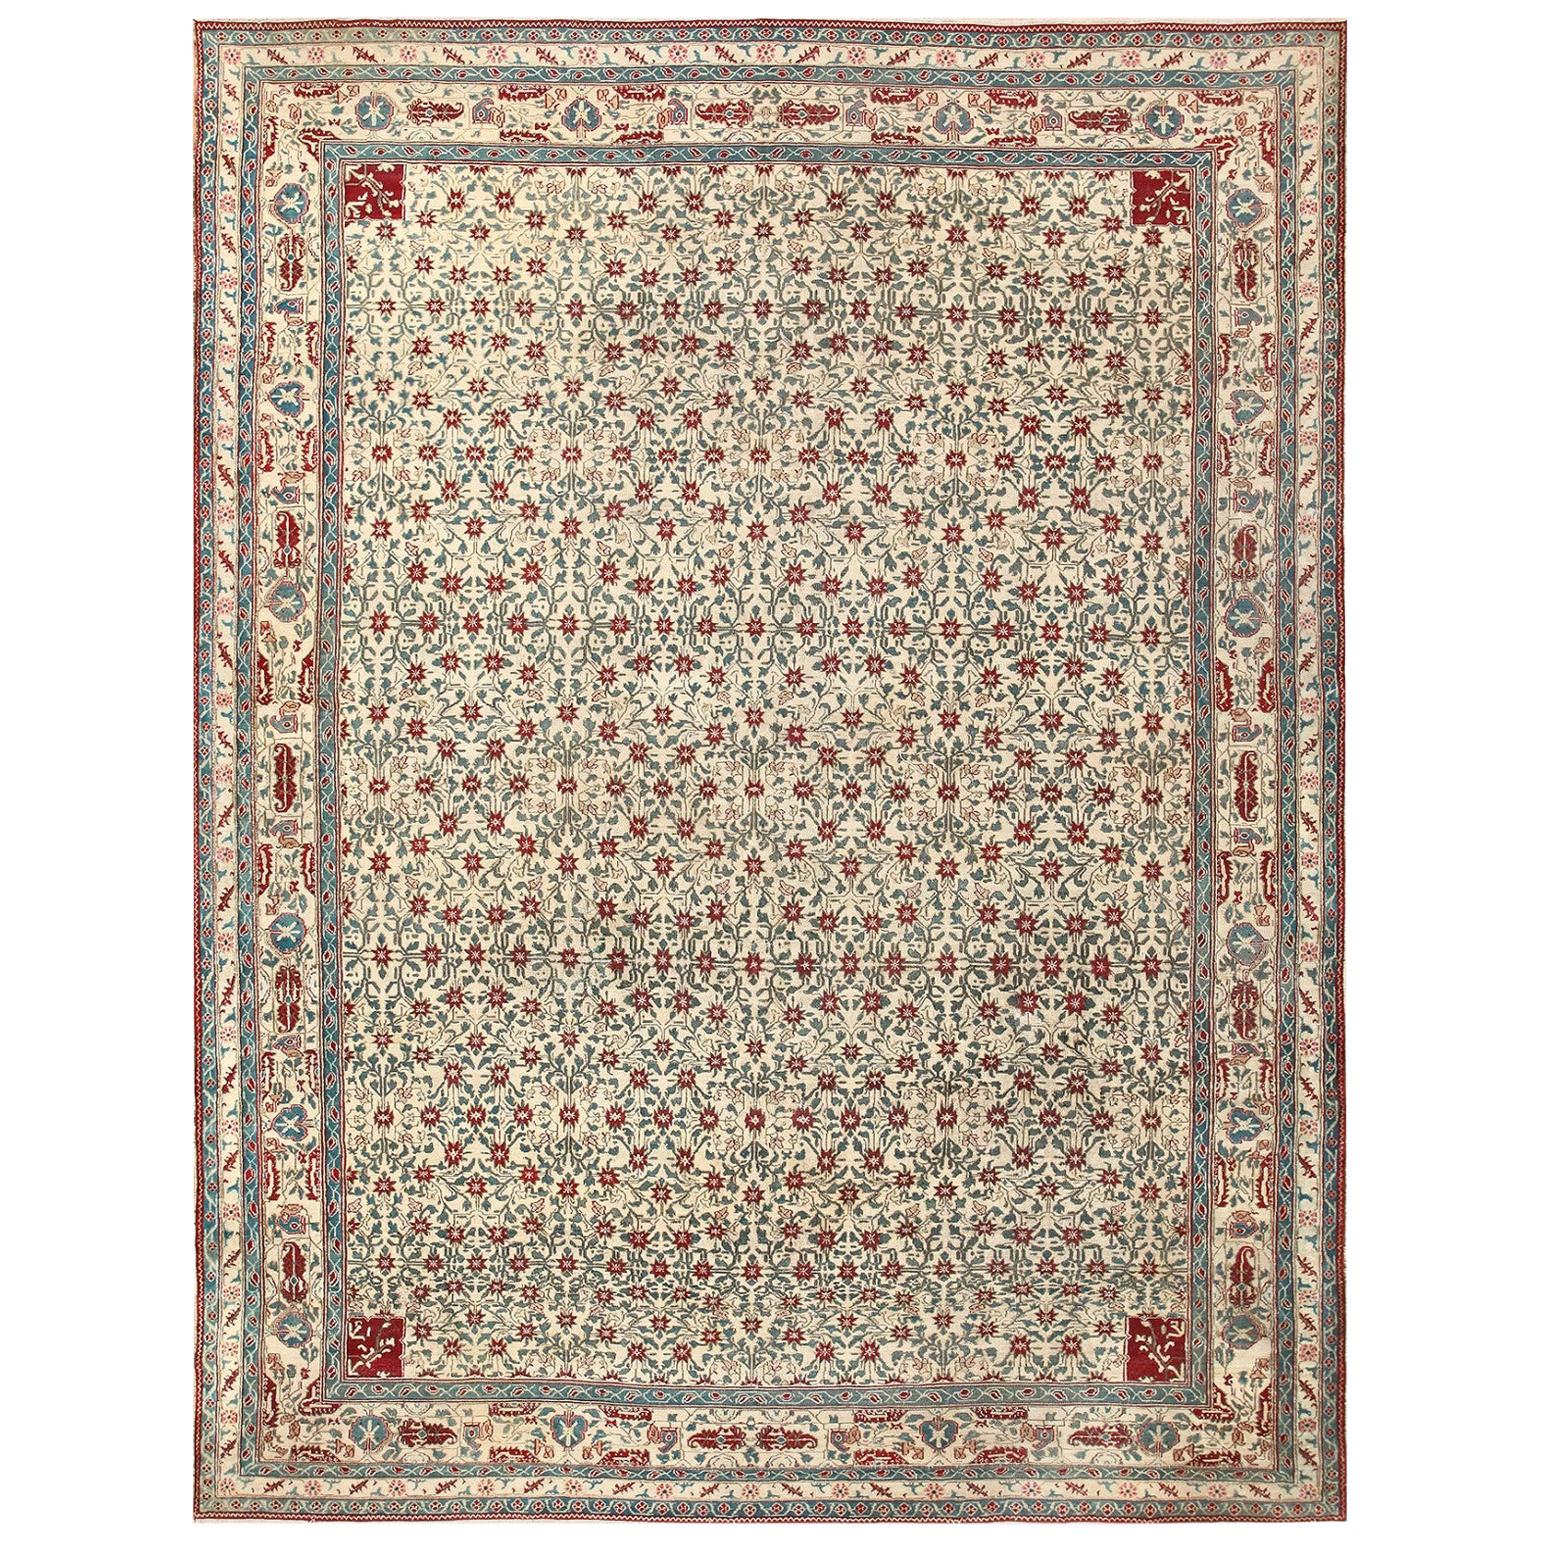 Nazmiyal Collection Antique Indian Agra Rug. Size: 8 ft 10 in x 11 ft 6 in